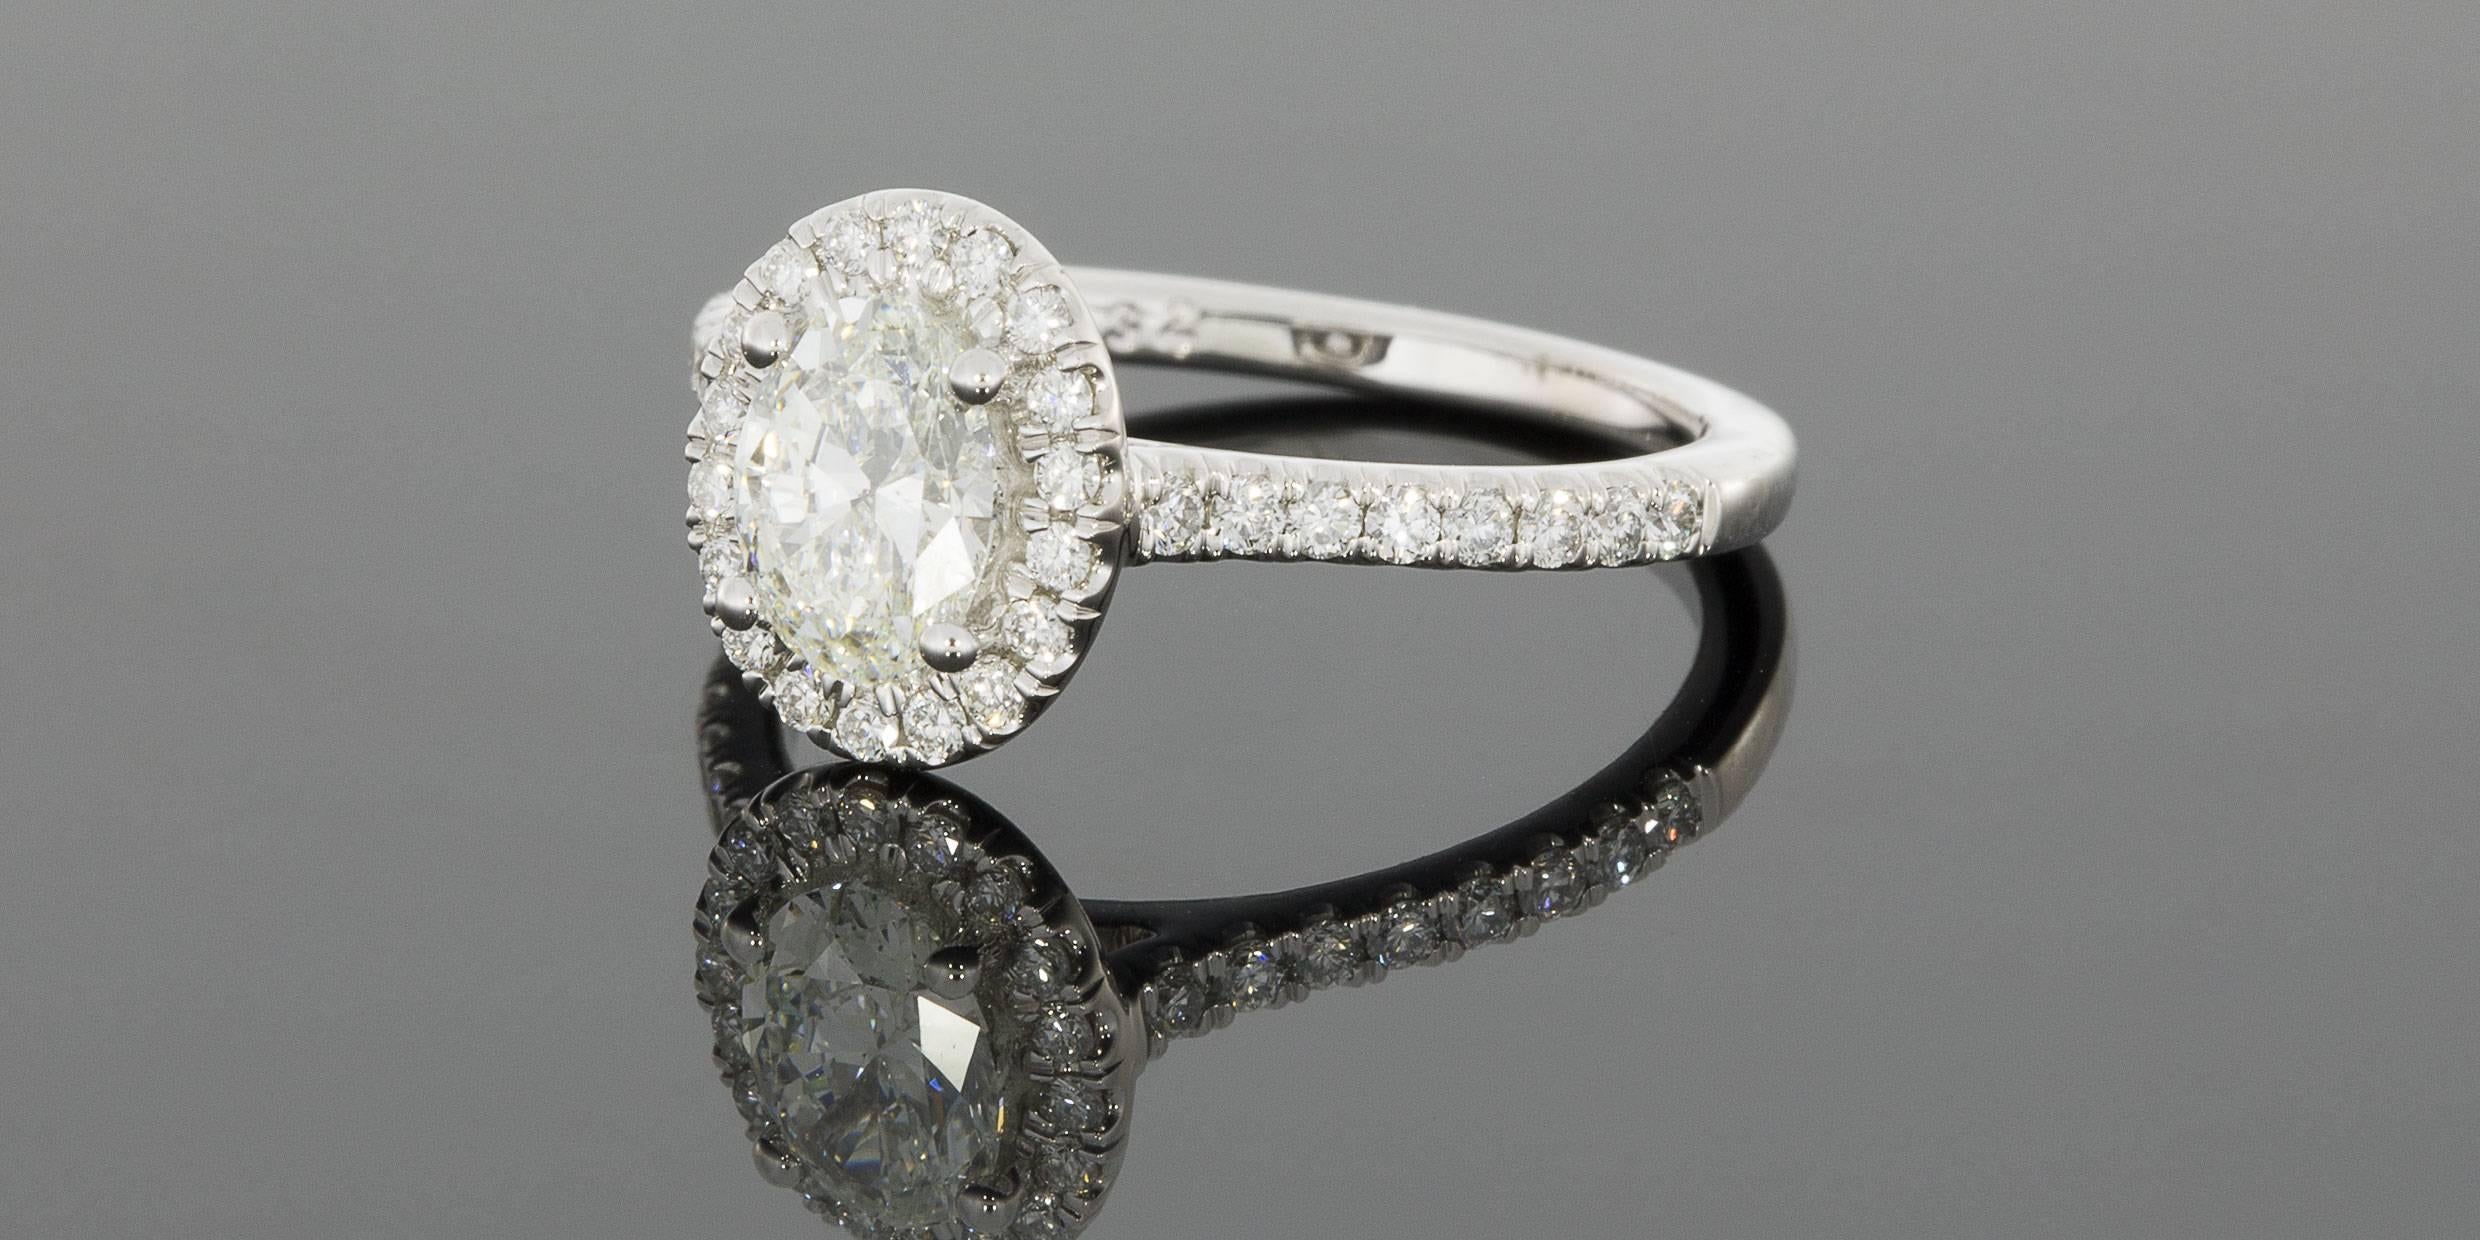 This gorgeous diamond halo engagement ring is from the designer Martin Flyer. This 65 year old, third generation family owned business handcrafts all their rings with extraordinary attention to detail, using only the highest quality, Hearts &